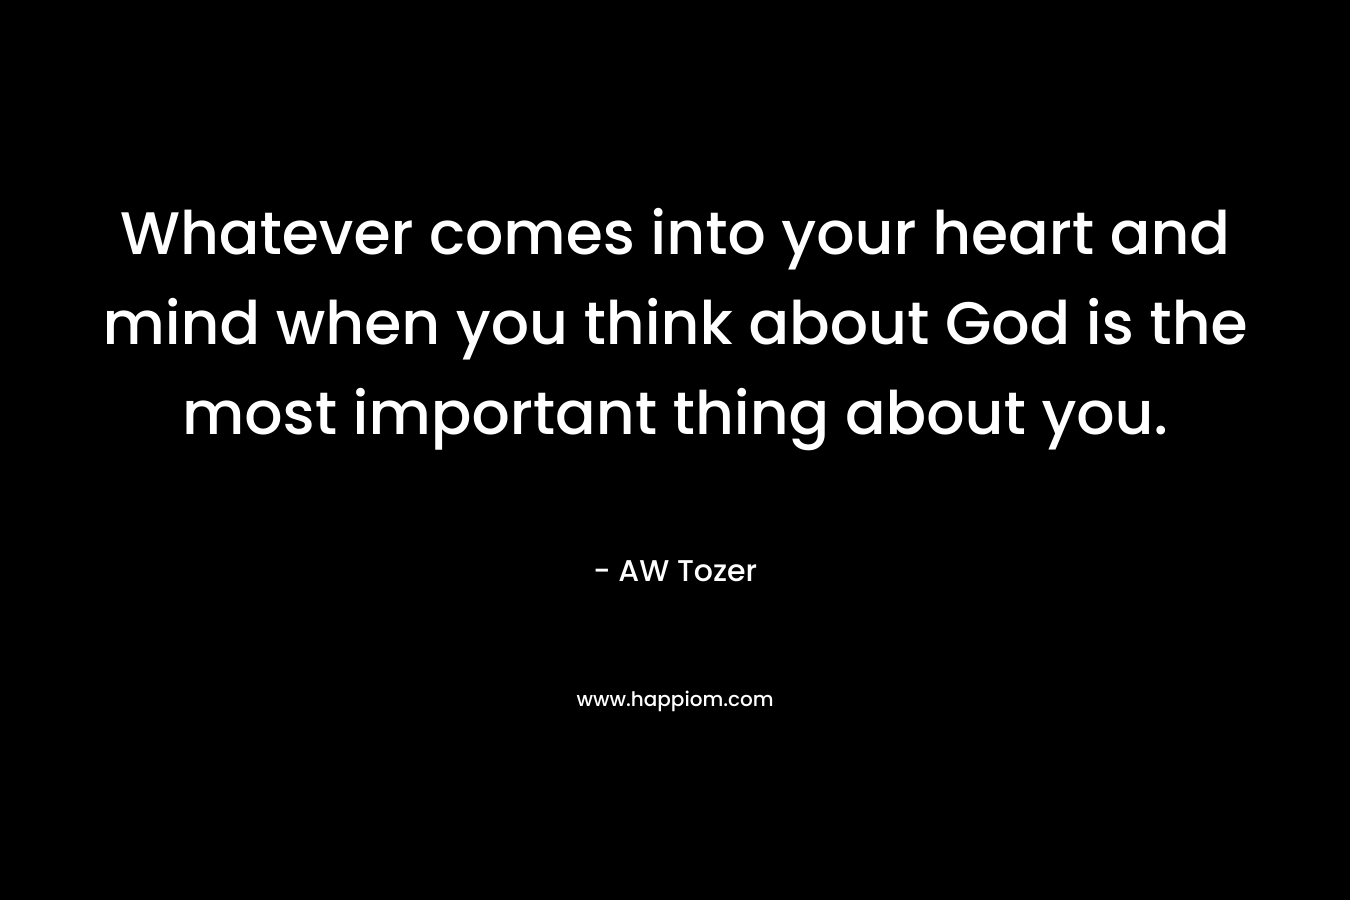 Whatever comes into your heart and mind when you think about God is the most important thing about you.